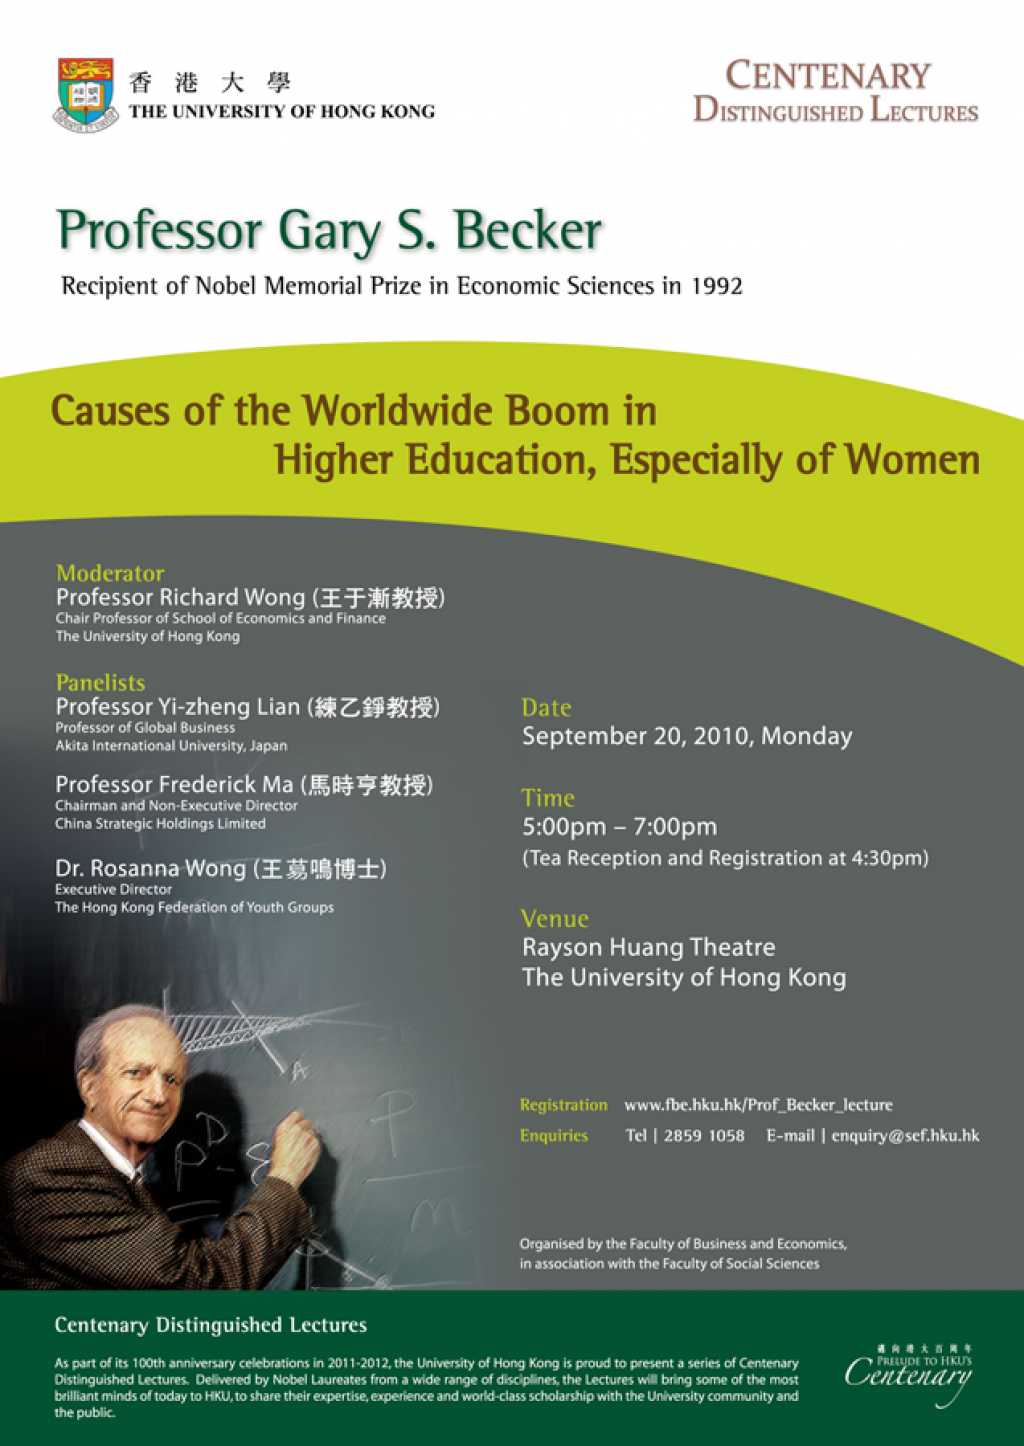 Centenary Distinguished Lecture by Professor Gary S. Becker